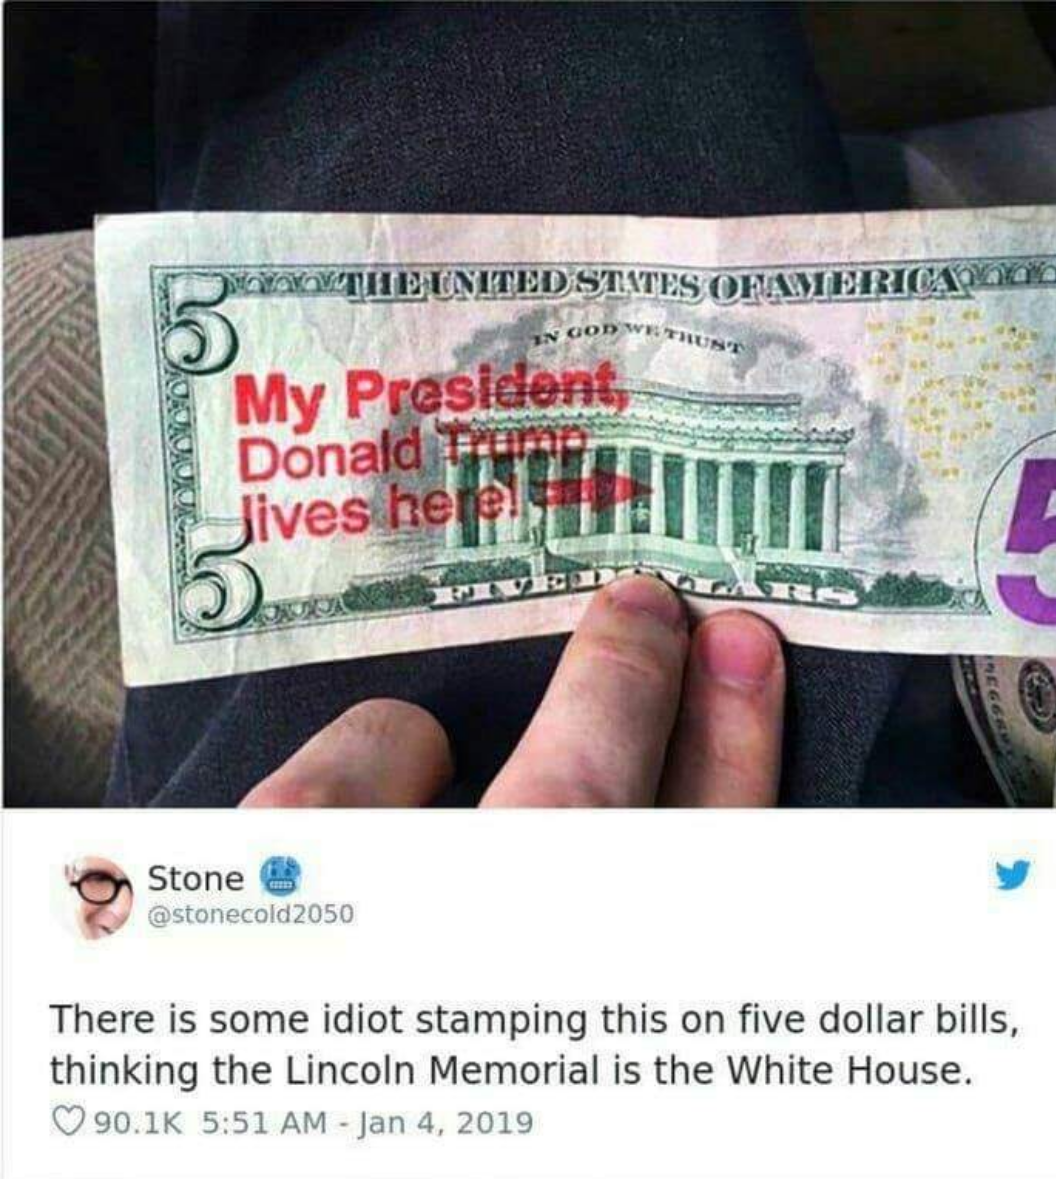 there is some idiot stamping this on five dollar bills thinking this is the white house - Noorted United States Ohamericaillon Ingowy 2002 My President, Donald Trump Jives hetes Stone stonecold 2050 There is some idiot stamping this on five dollar bills, 